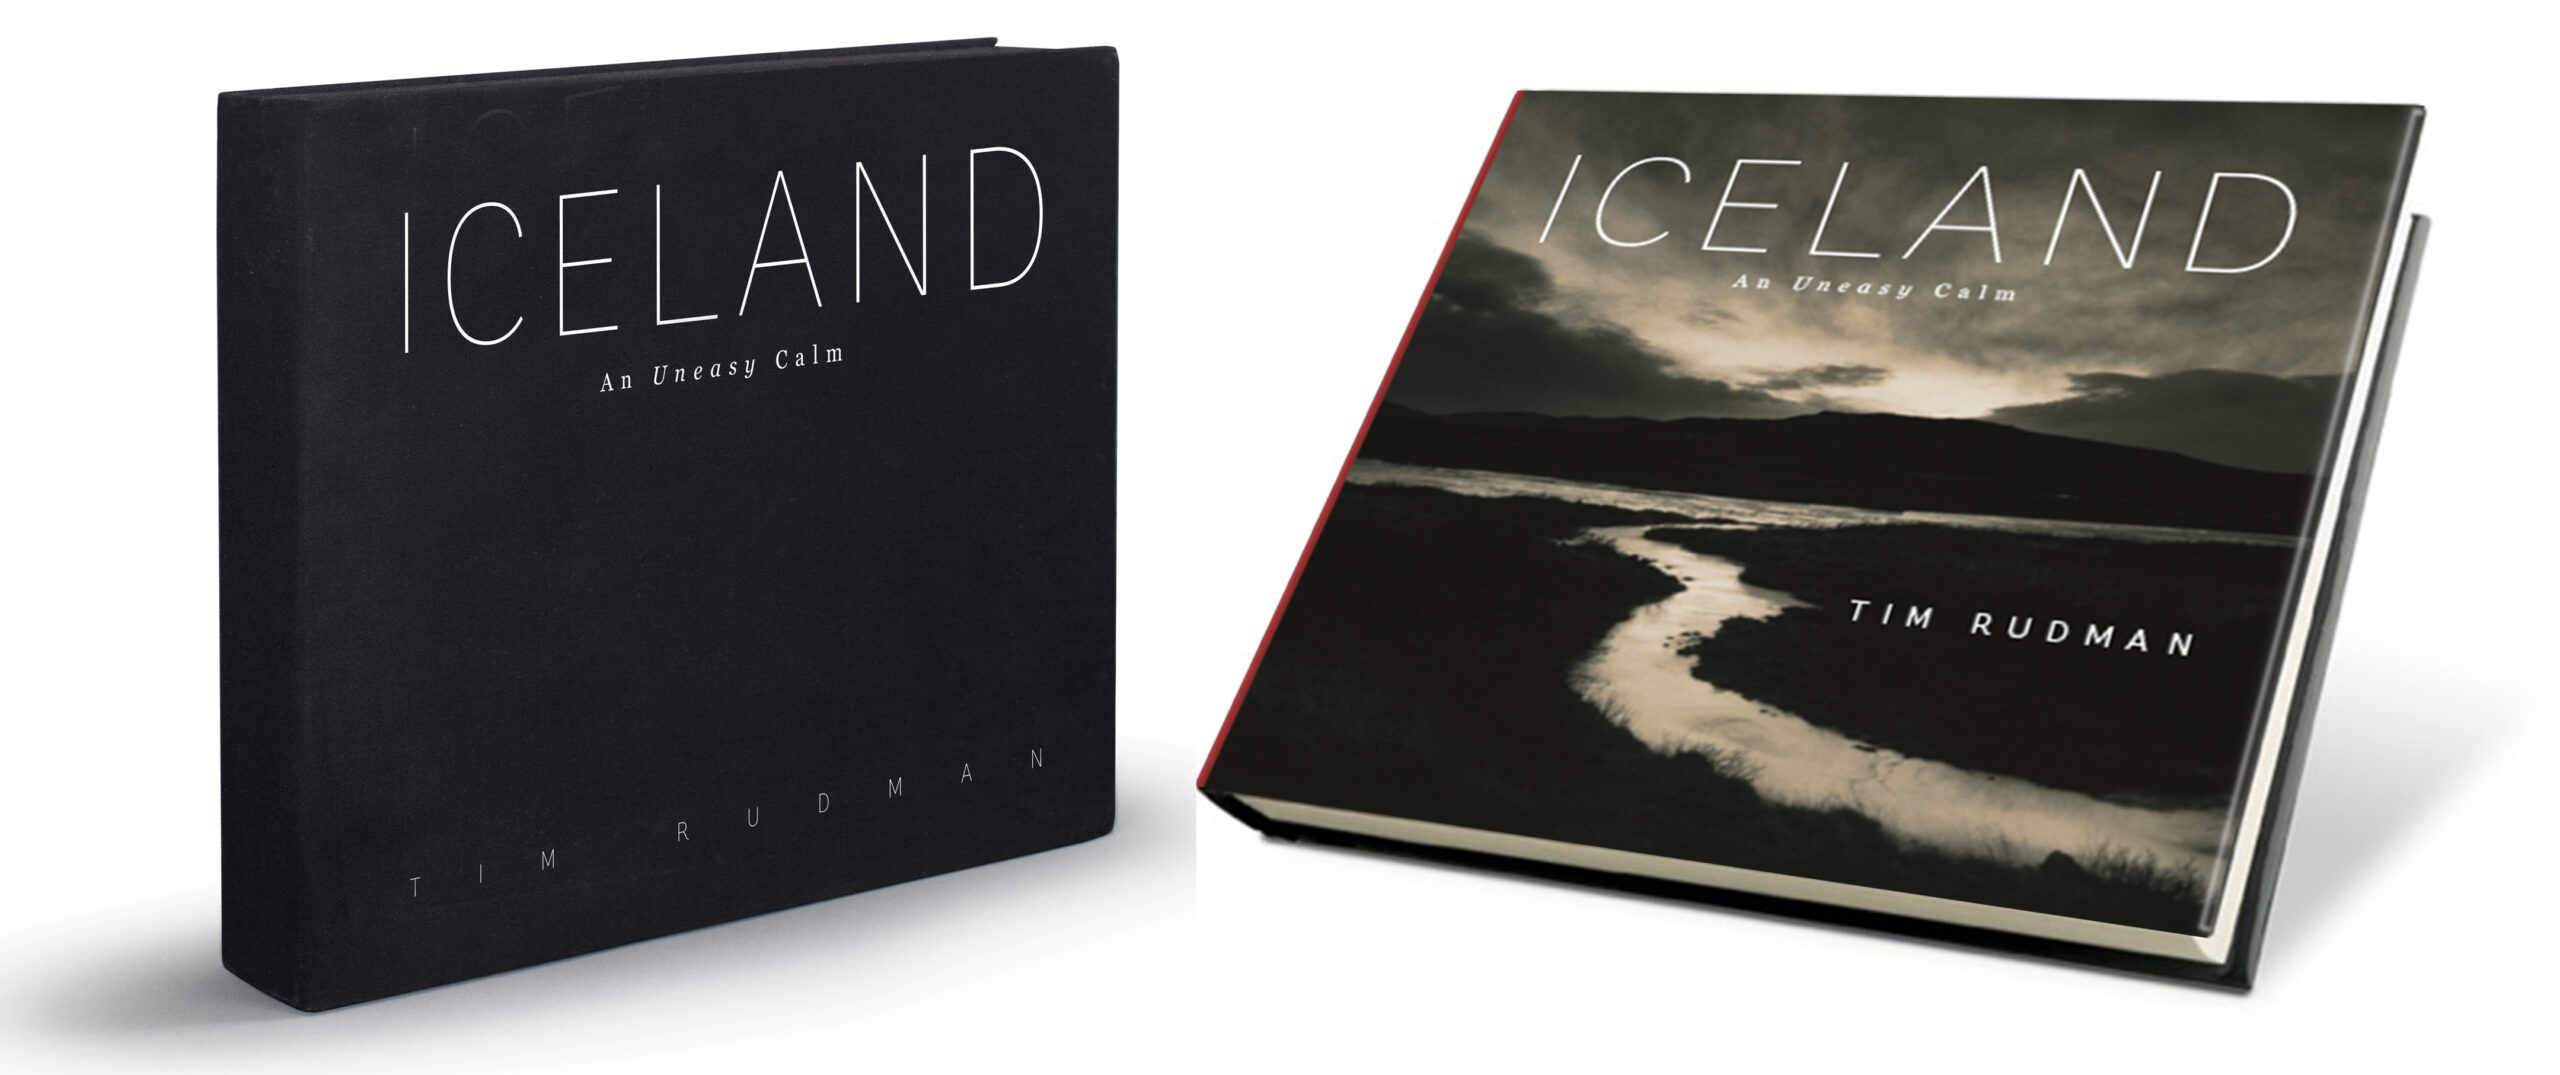 Tim Rudman's 'Iceland, An Uneasy Calm' standard boxed edition